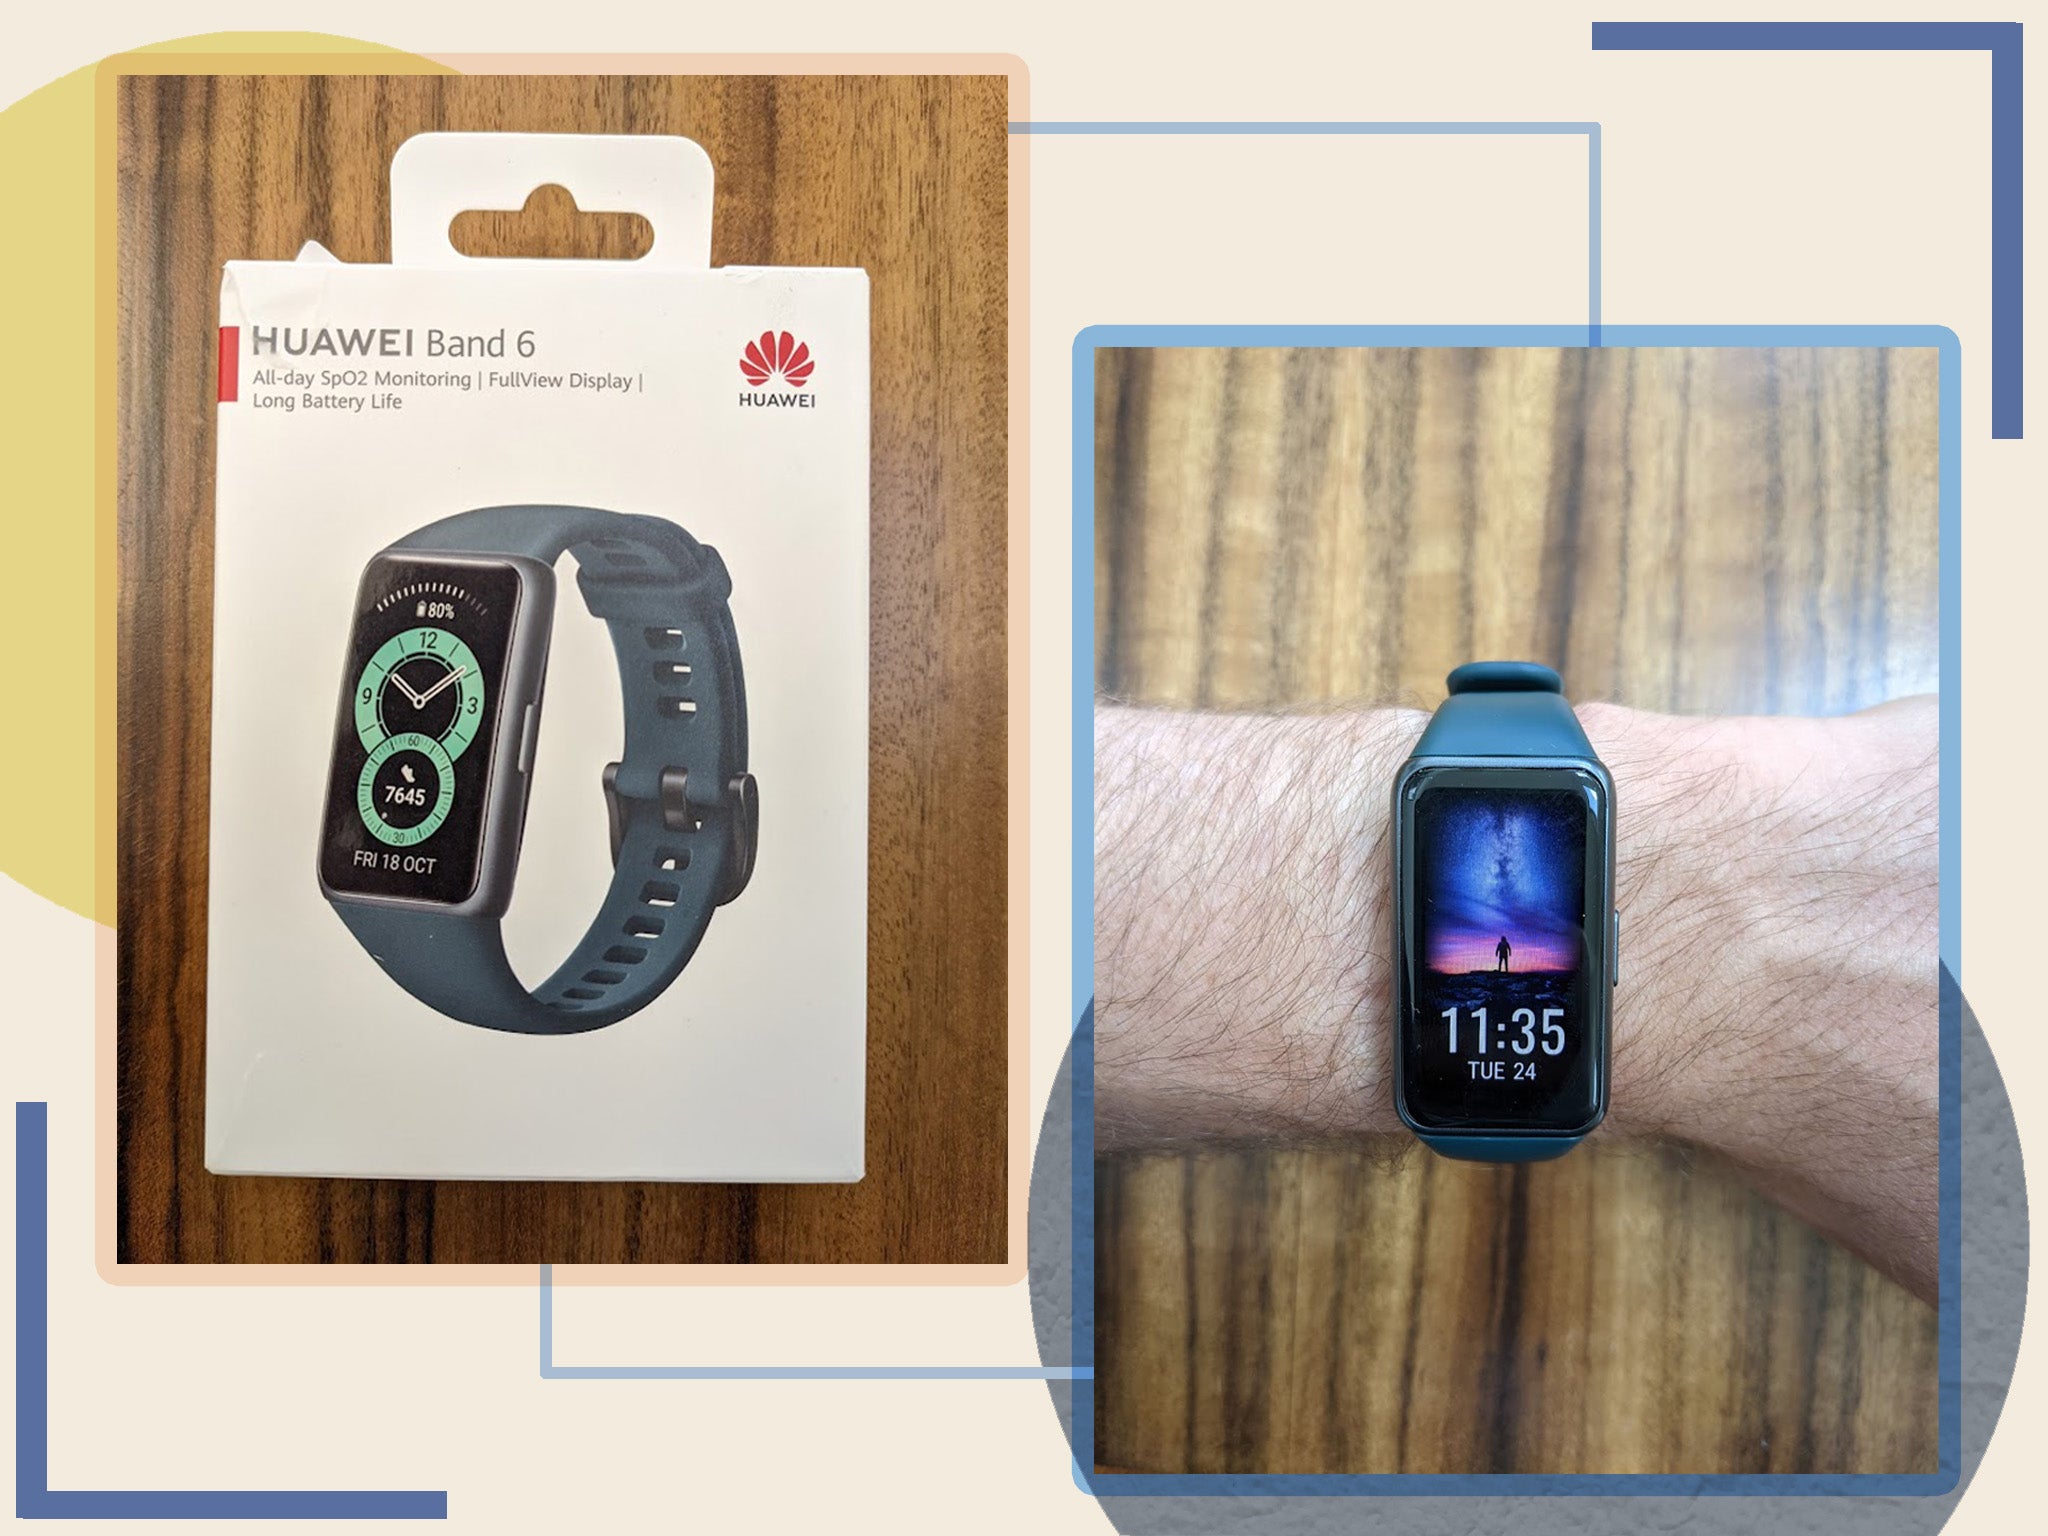 Huawei band 6 pro review: The budget fitness tracker with over 90